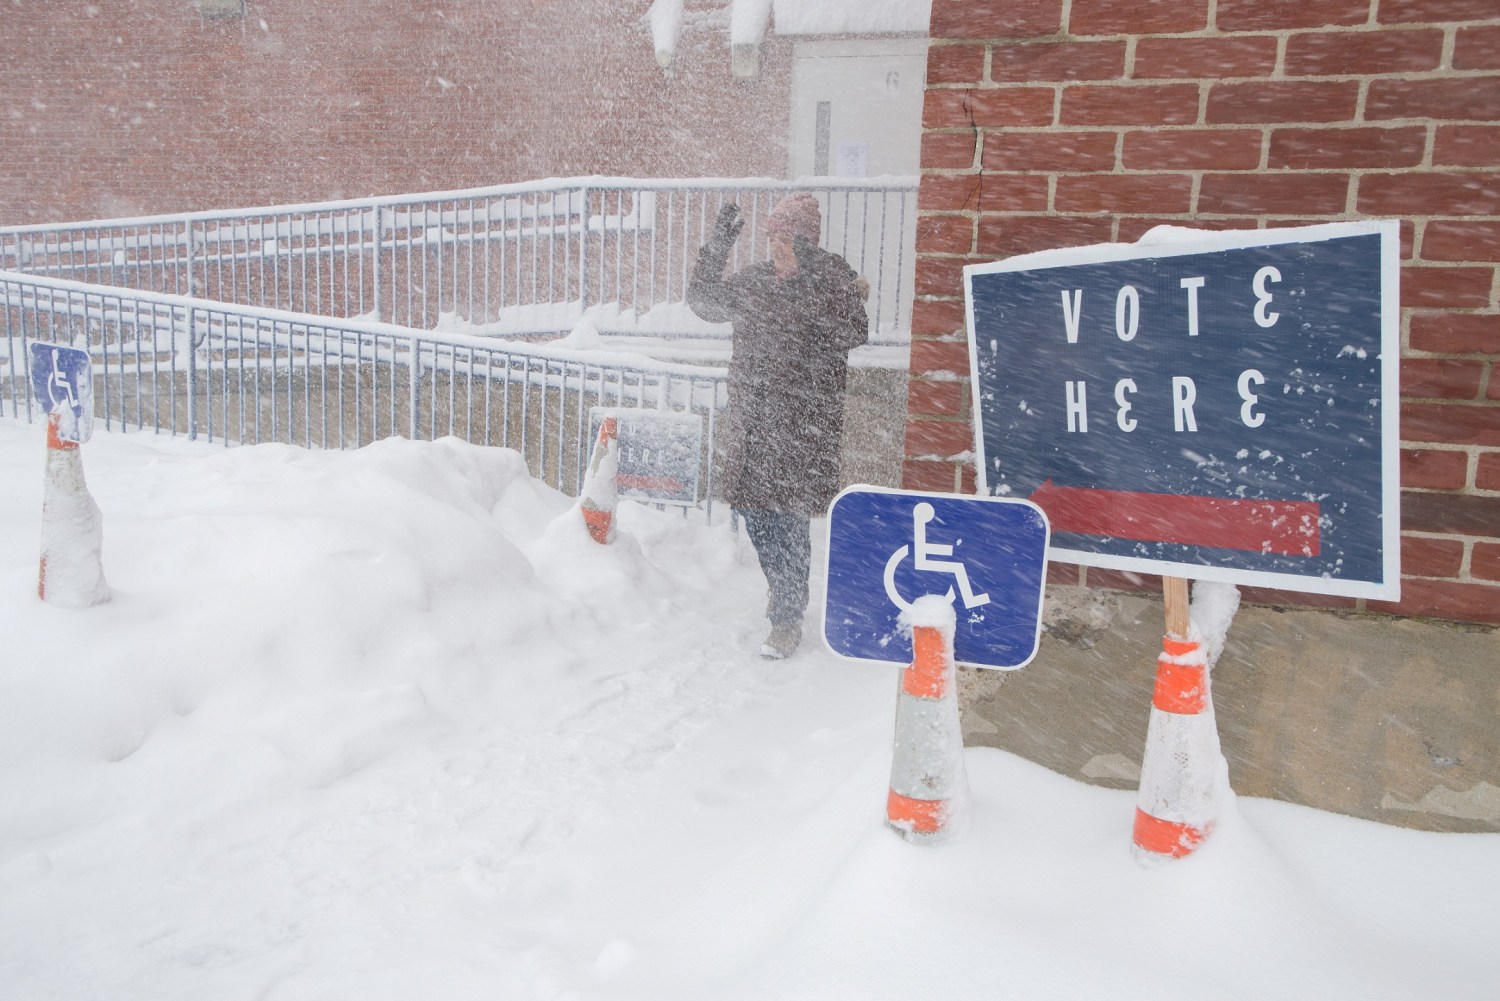 A woman leaves the polling place as winter storm blanketed the state on local election day in Plaistow, New Hampshire, U.S., March 13, 2018. On the orders of state officials, New Hampshire municipalities proceeded with scheduled elections despite a winter storm that covered the region in snow and made driving difficult.  REUTERS/Randall Mikkelsen